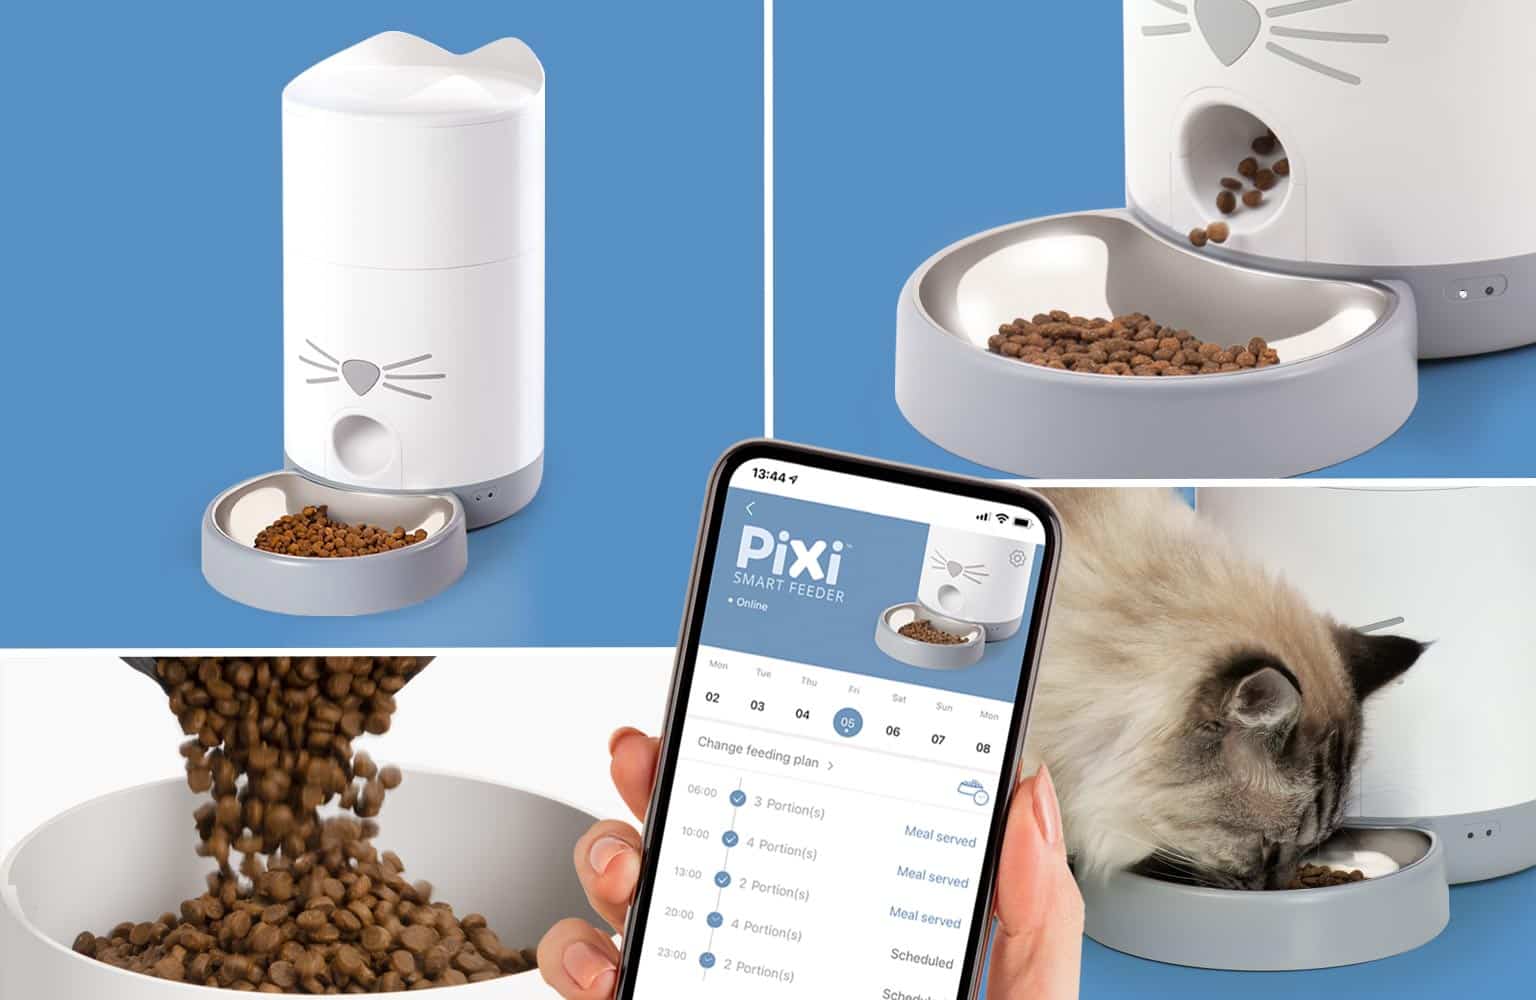 https://www.catit.com/wp-content/uploads/2023/02/PIXI-Smart-Feeder-product-page-mobile.jpg